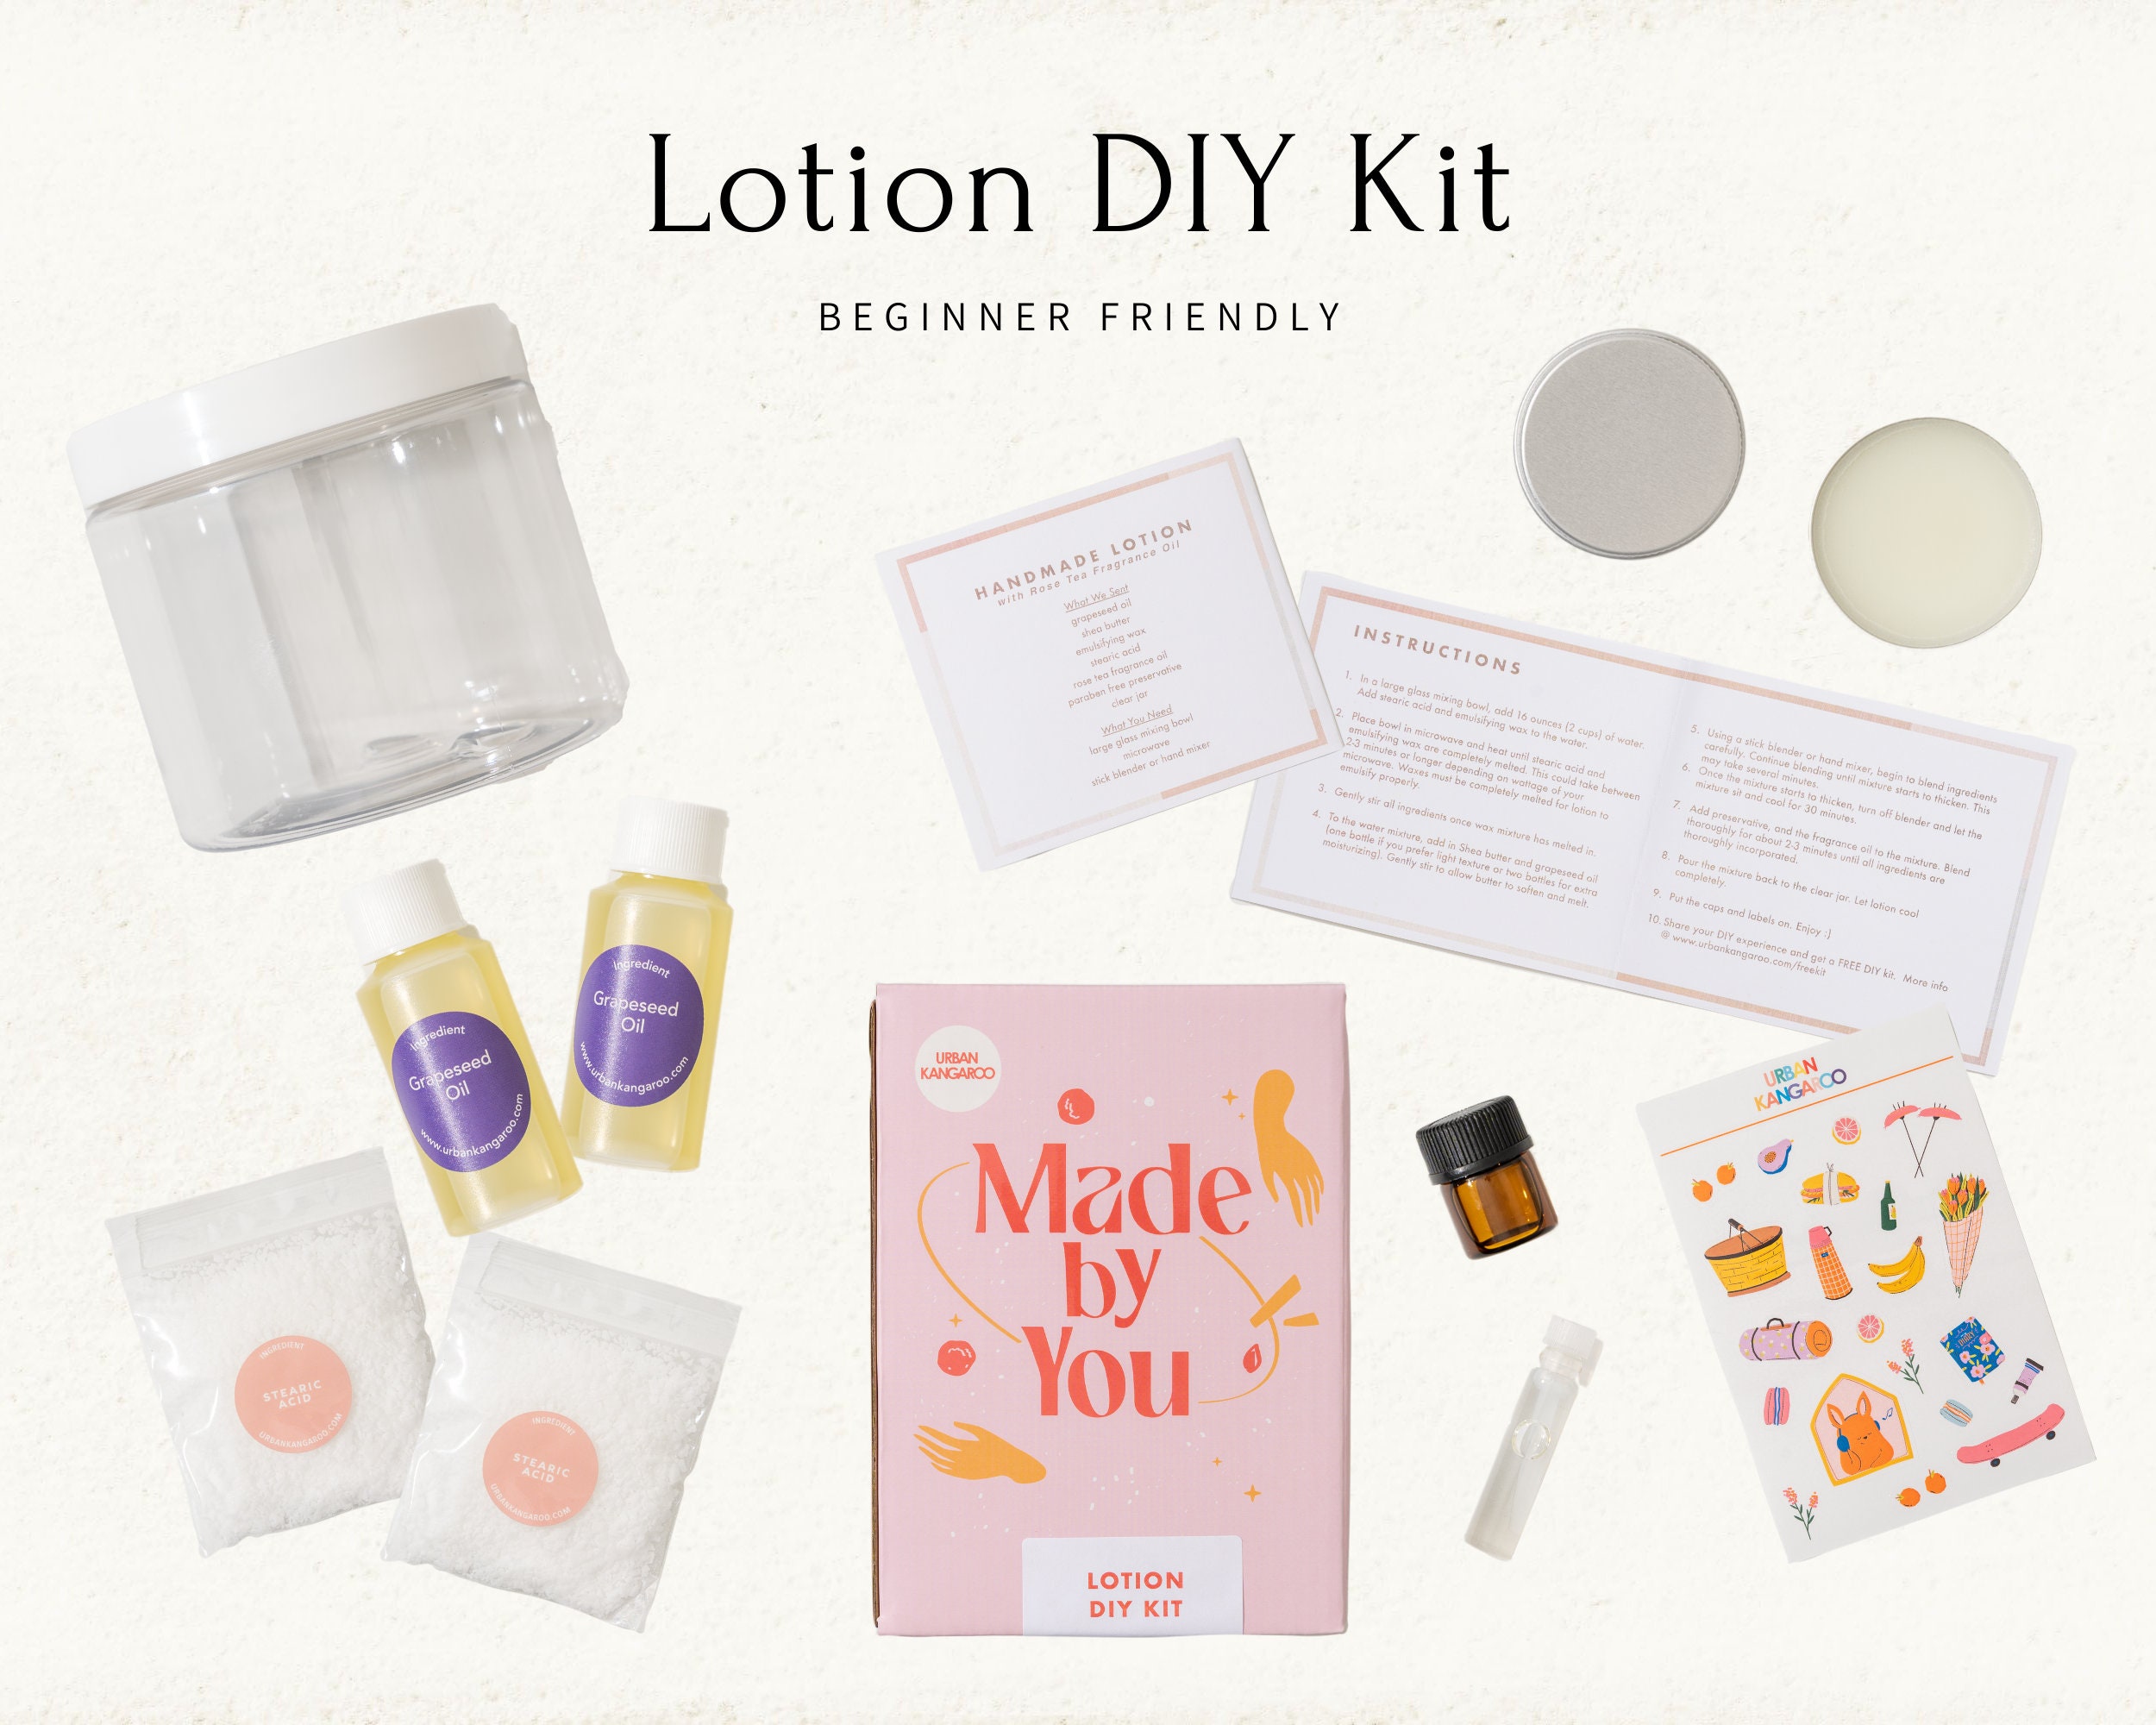 DIY LOTION KIT Learn to Make Natural Whipped Moisturizer Includes Scent,  Instructions, Jars, Butter, Natural Preservative 